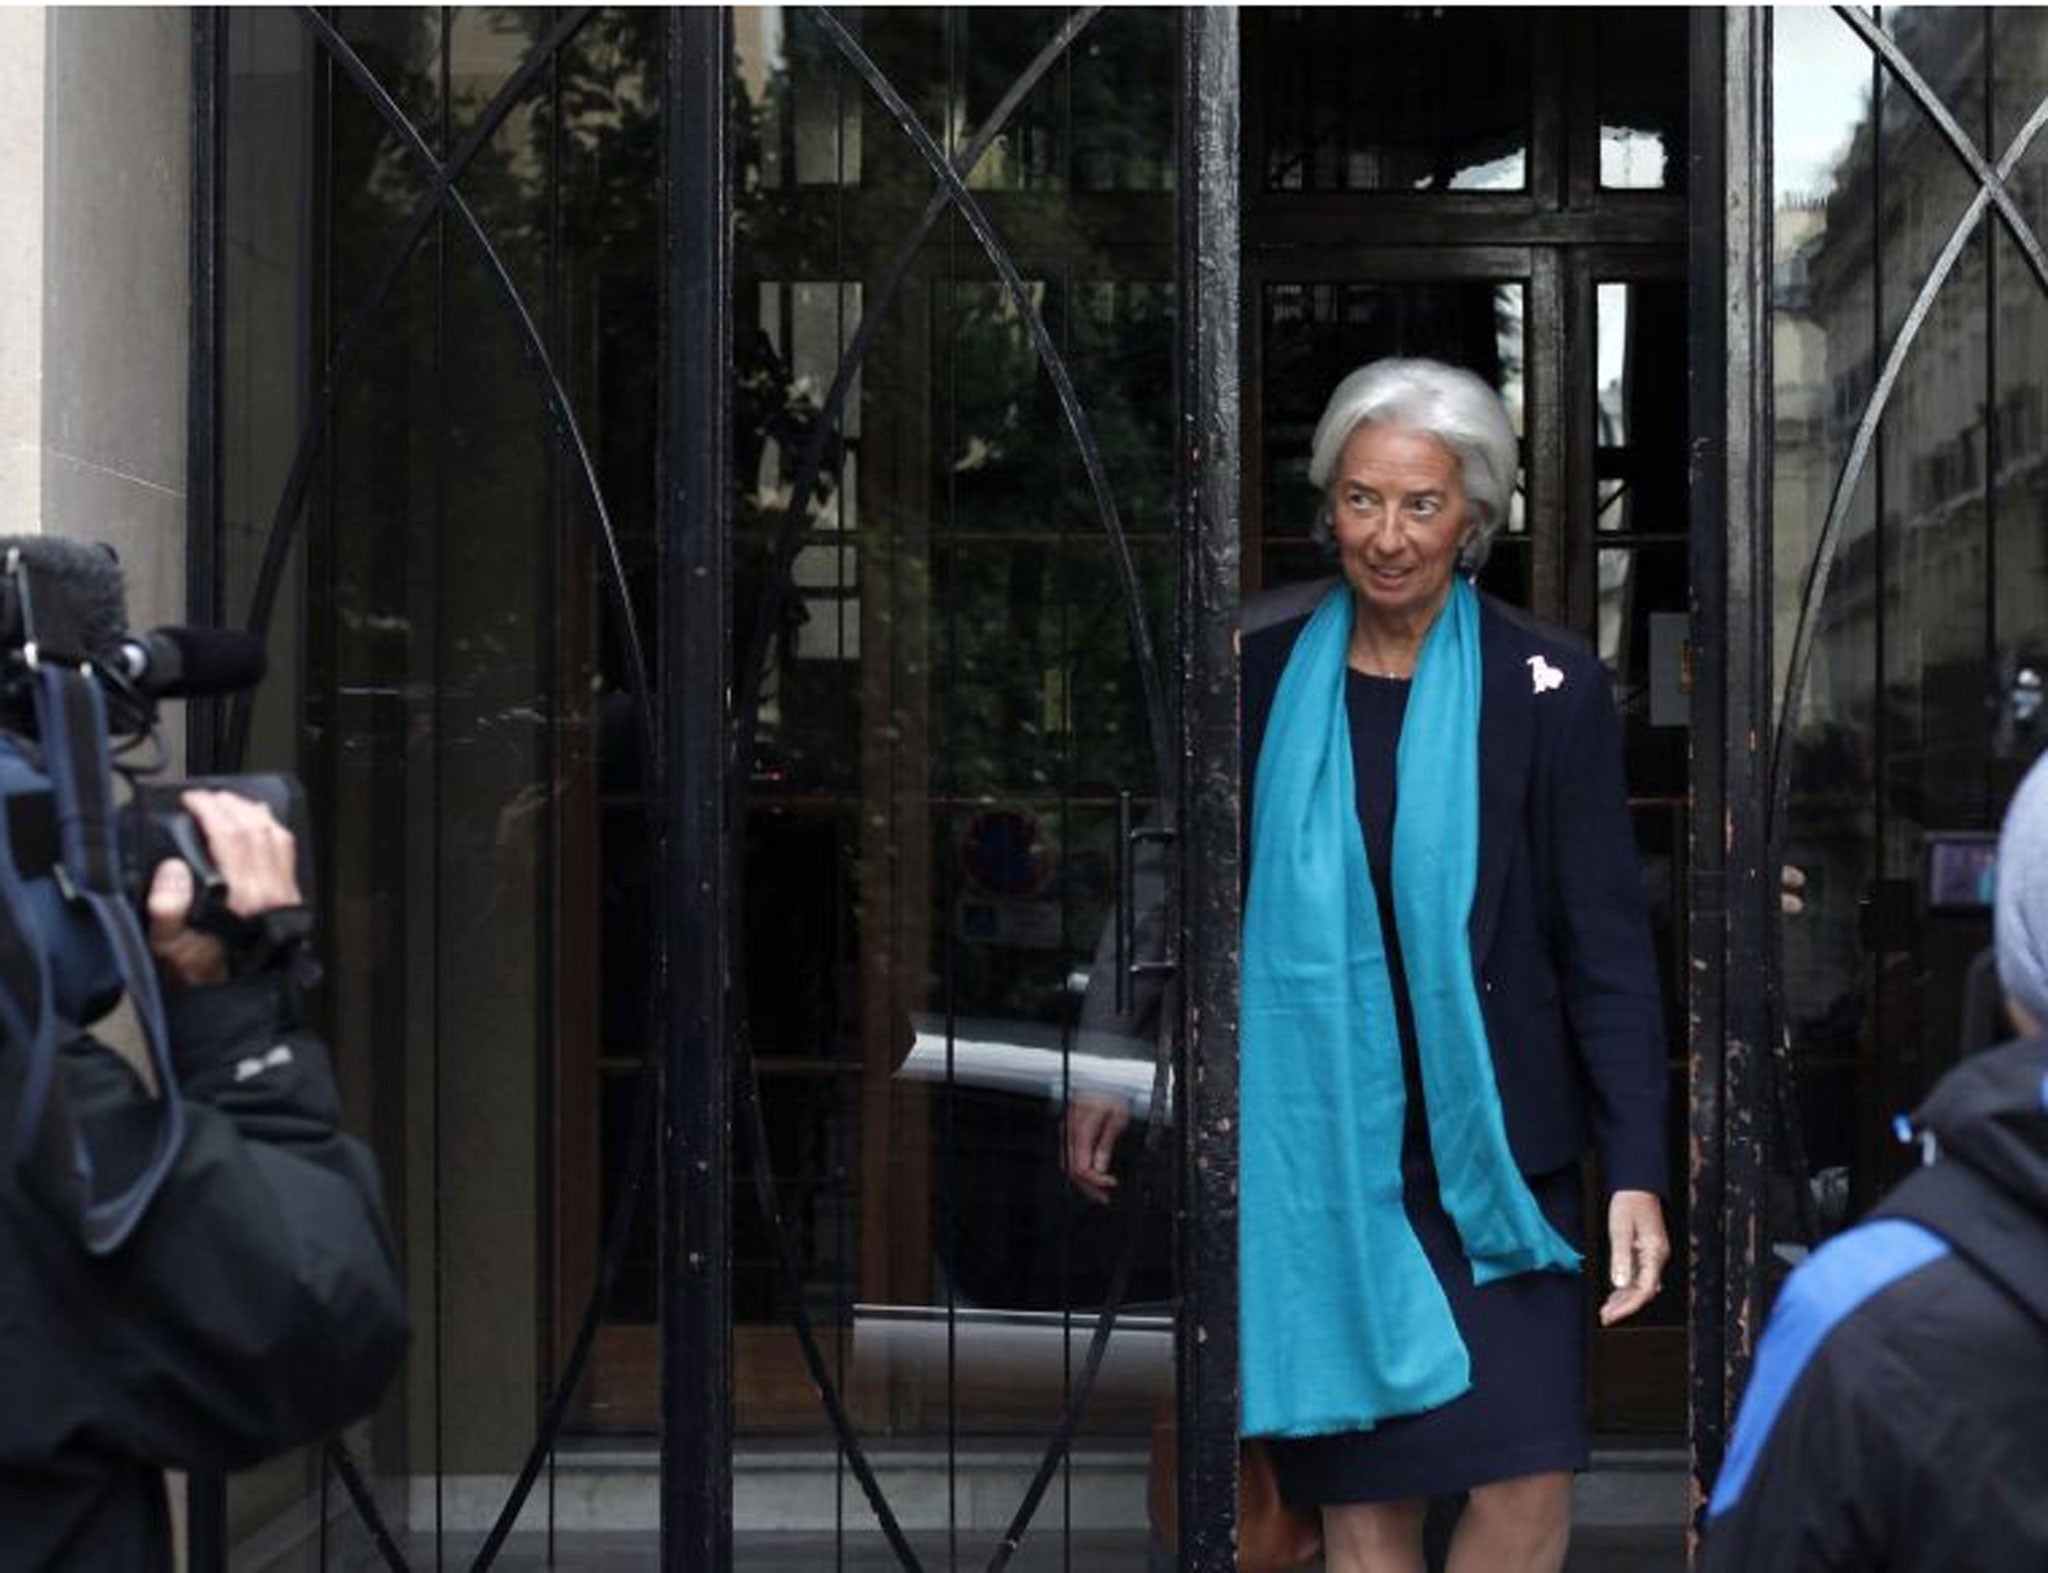 IMF Managing Director Christine Lagarde leaves her apartment building before appearing in a Paris court